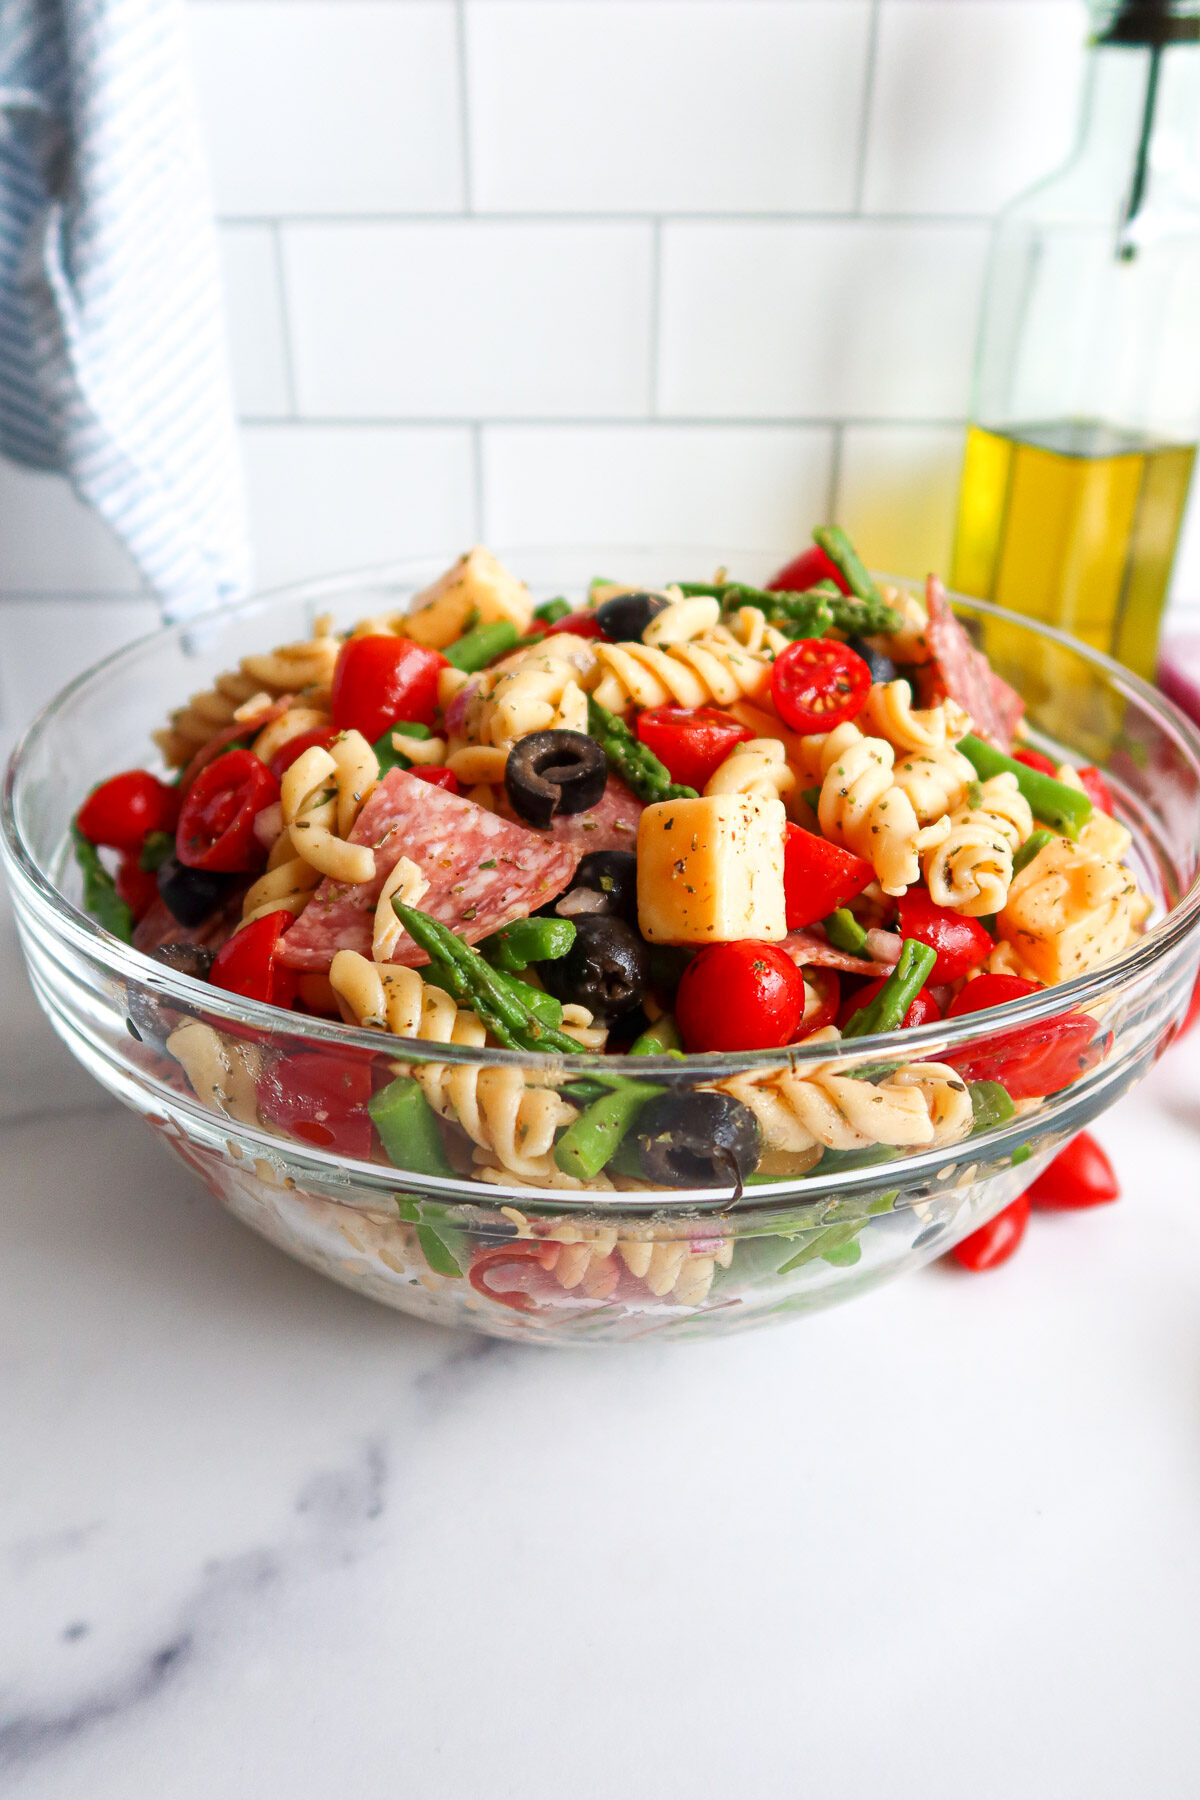 Pasta salad in a glass bowl.